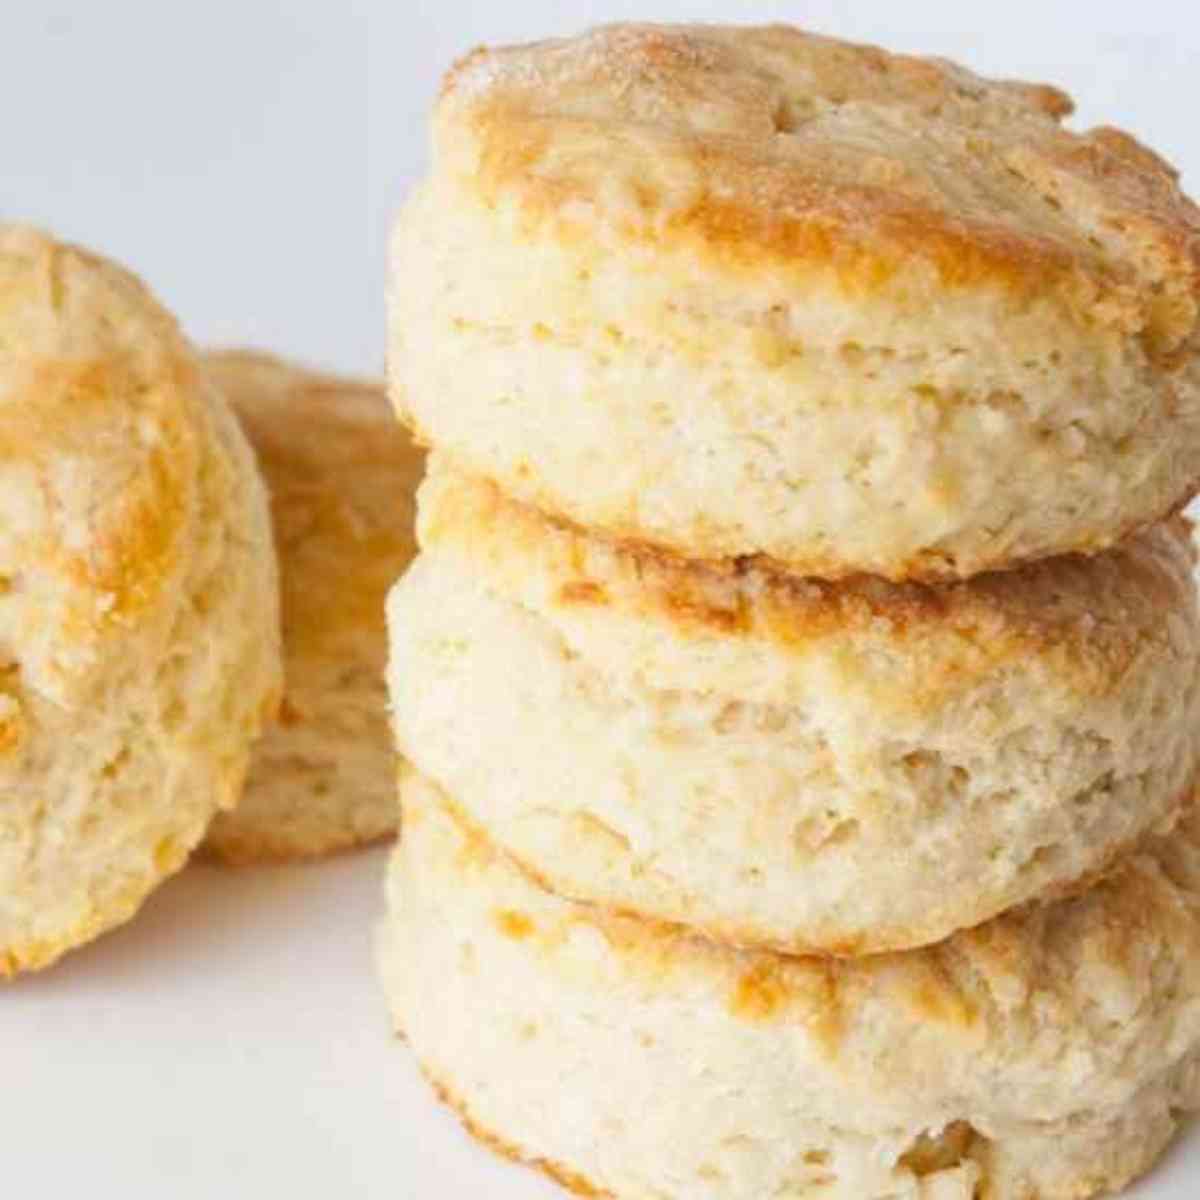 A stack of hot buttermilk biscuits.